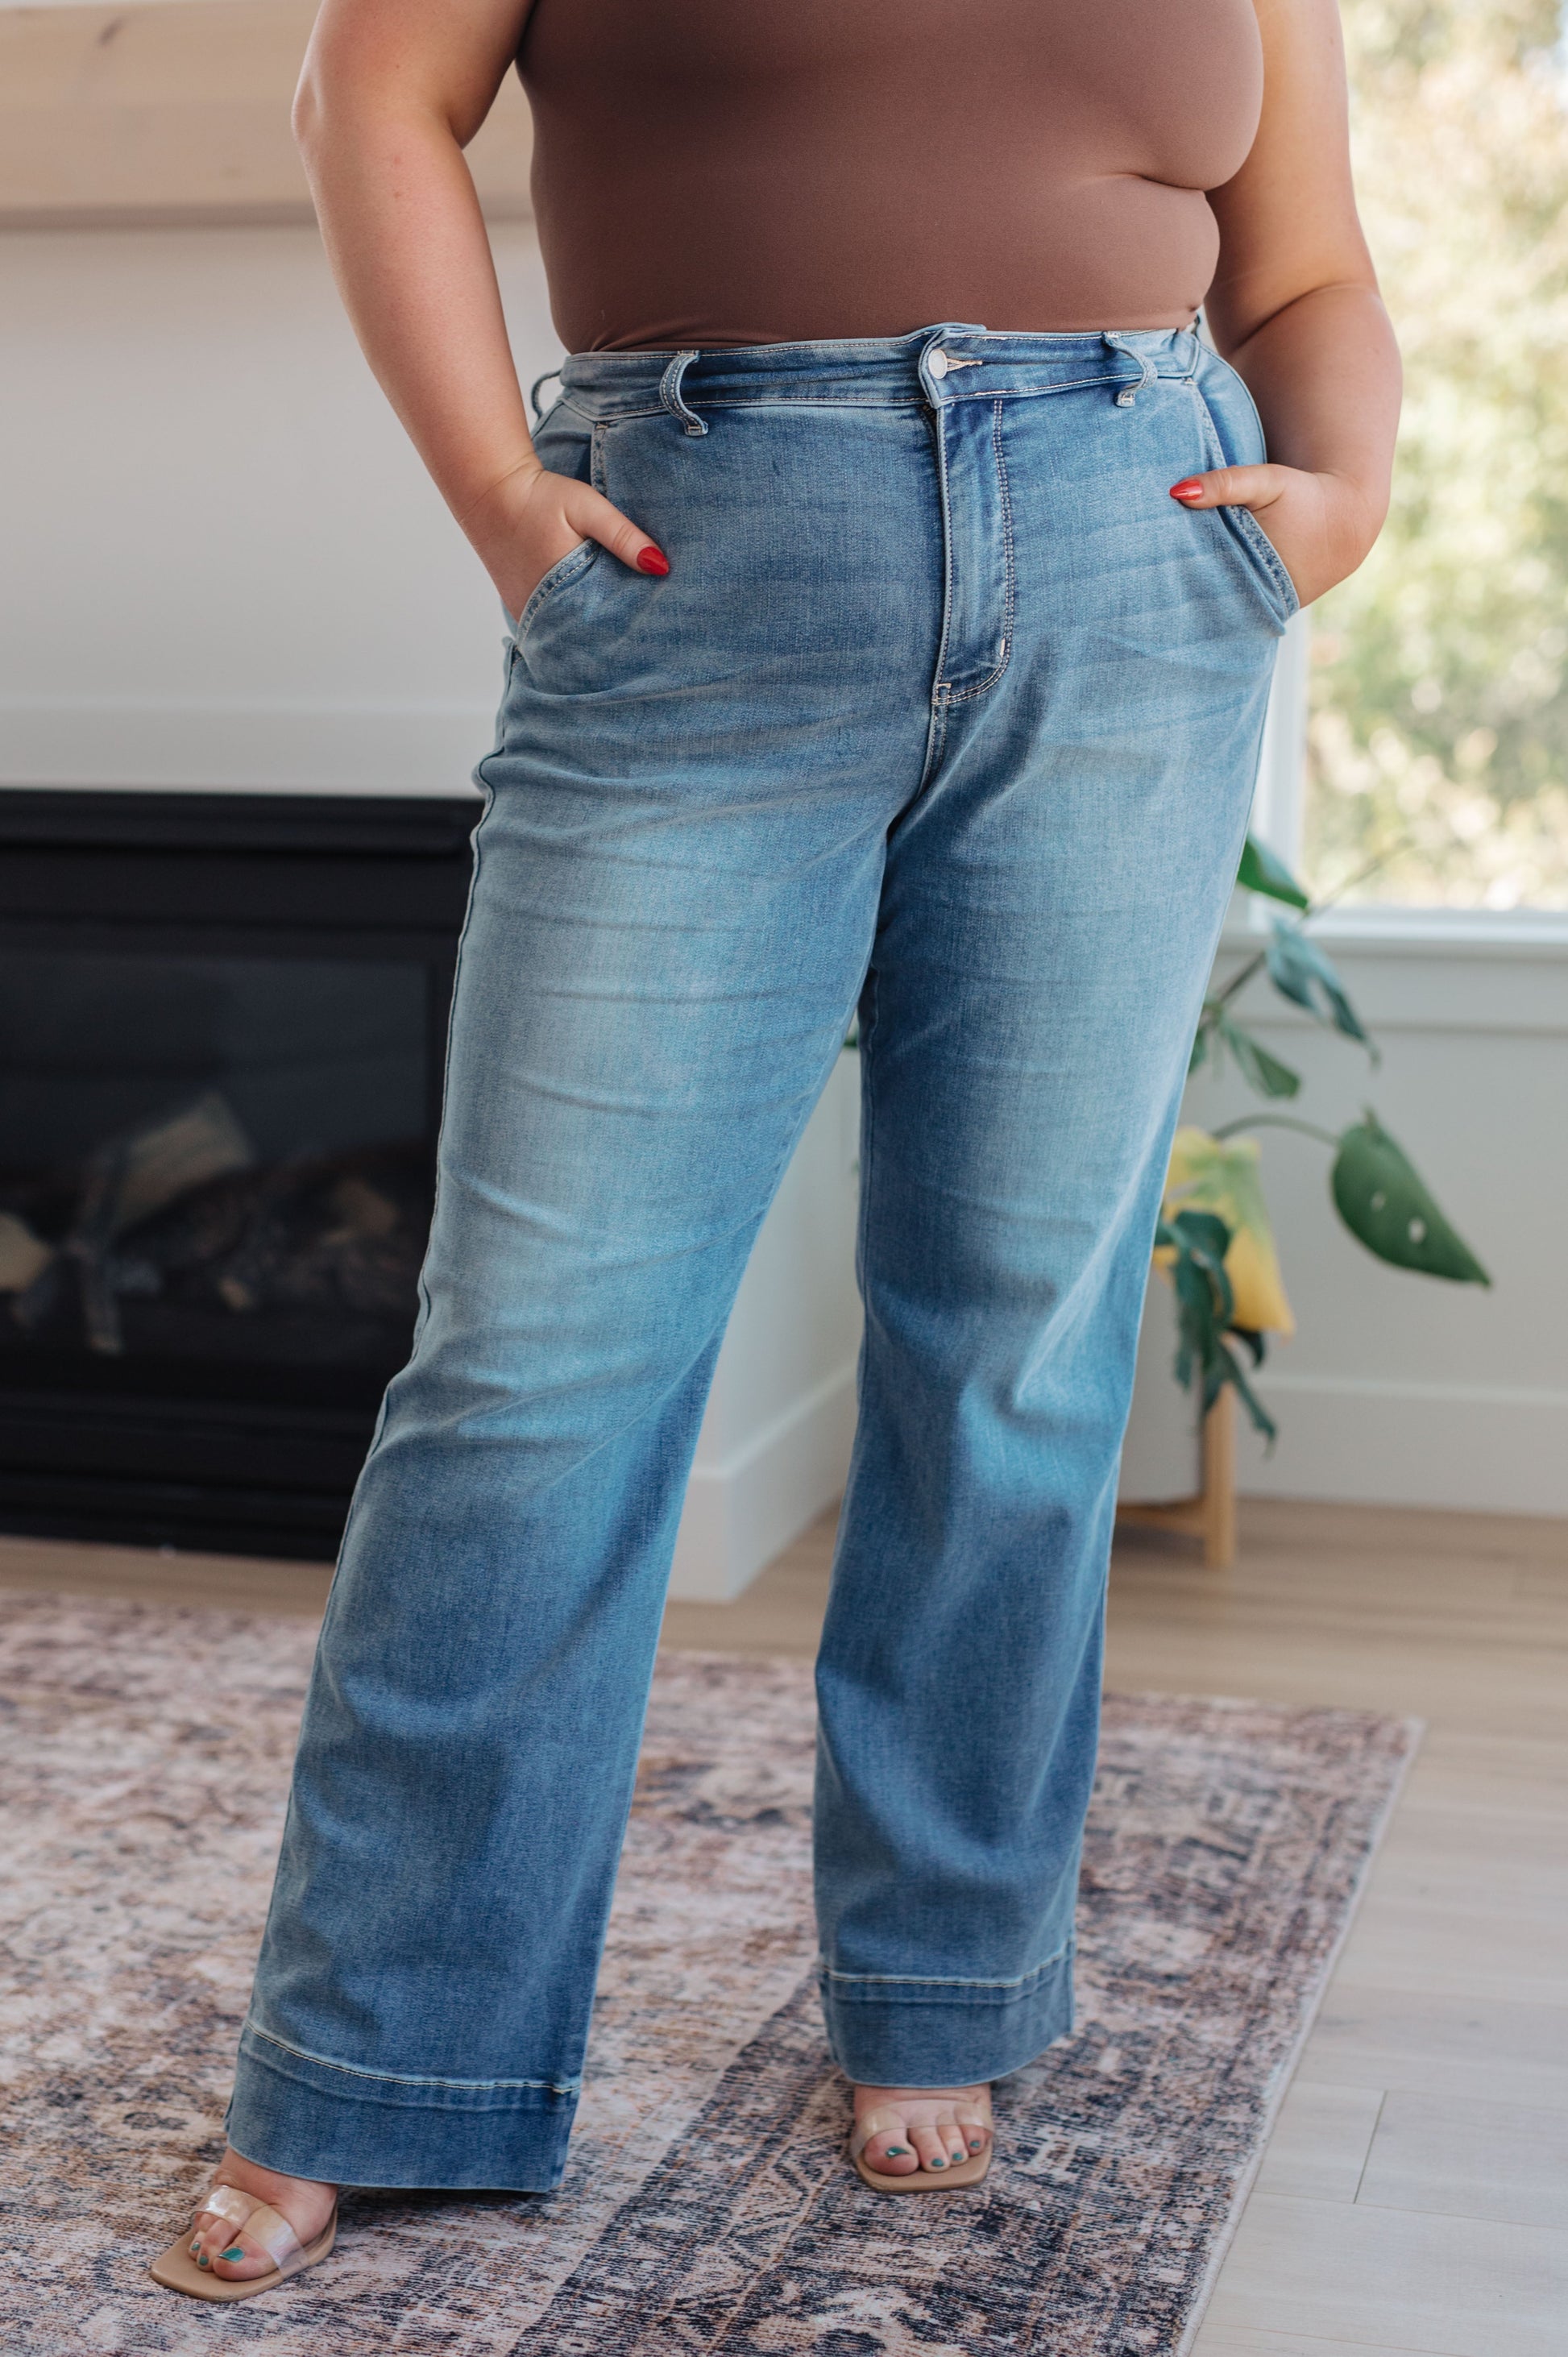 The Mindy Mid Rise Wide Leg Jeans are the perfect closet essential that can be worn year round! Featuring a stretchy light wash denim that shapes a mid rise waist with slanted pockets and zipper fly. Wide cut pant legs end at a wide hem detail and is perfected with lived-in fading throughout.  The acid wash process used to manufacture these amazing jeans may cause a variation in coloring from pair to pair! 0 - 24W